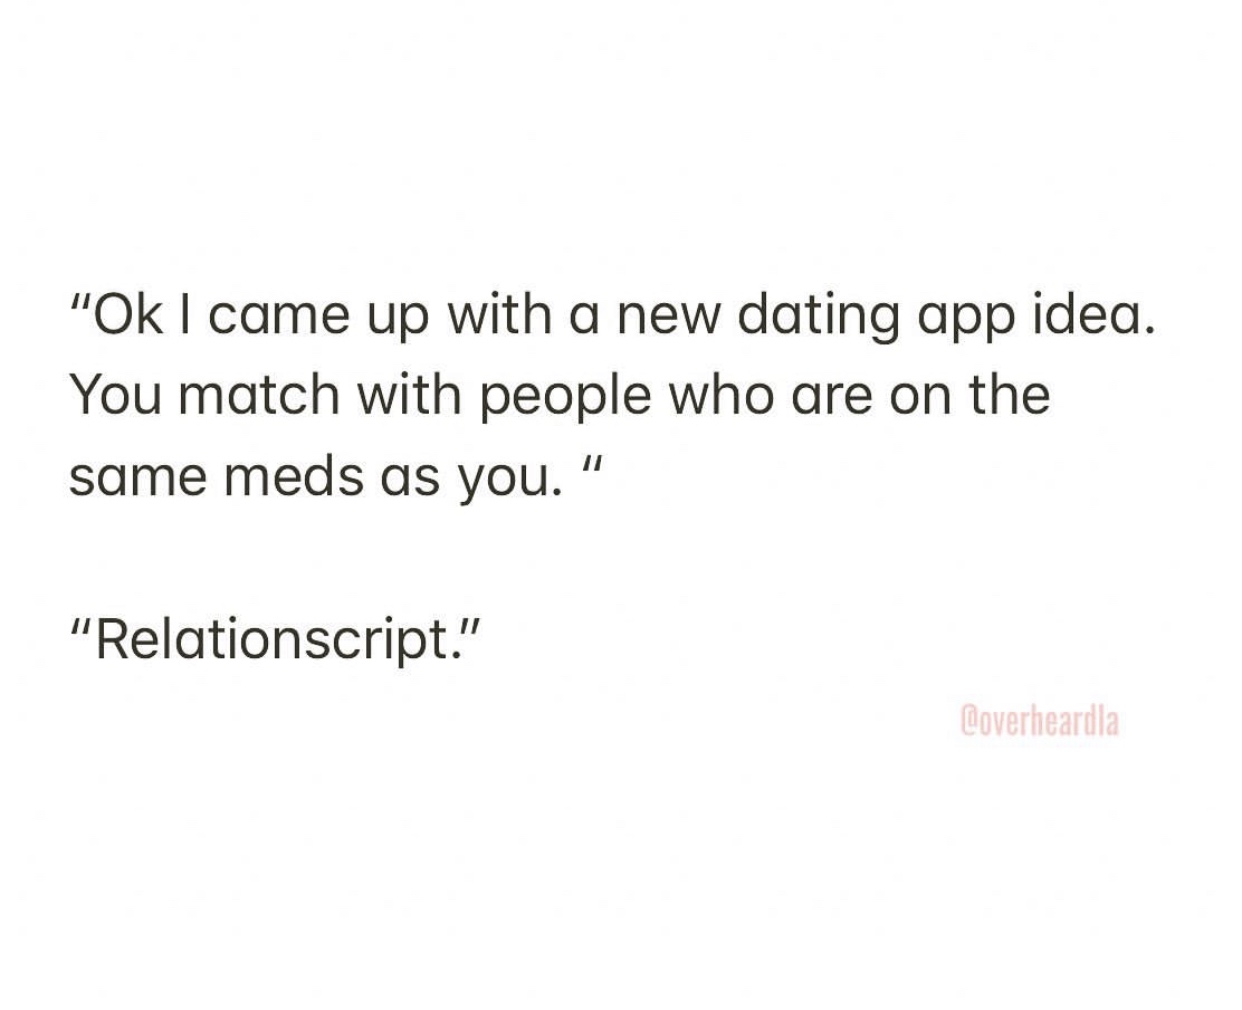 angle - "Ok I came up with a new dating app idea. You match with people who are on the same meds as you." "Relationscript." Coverheardla